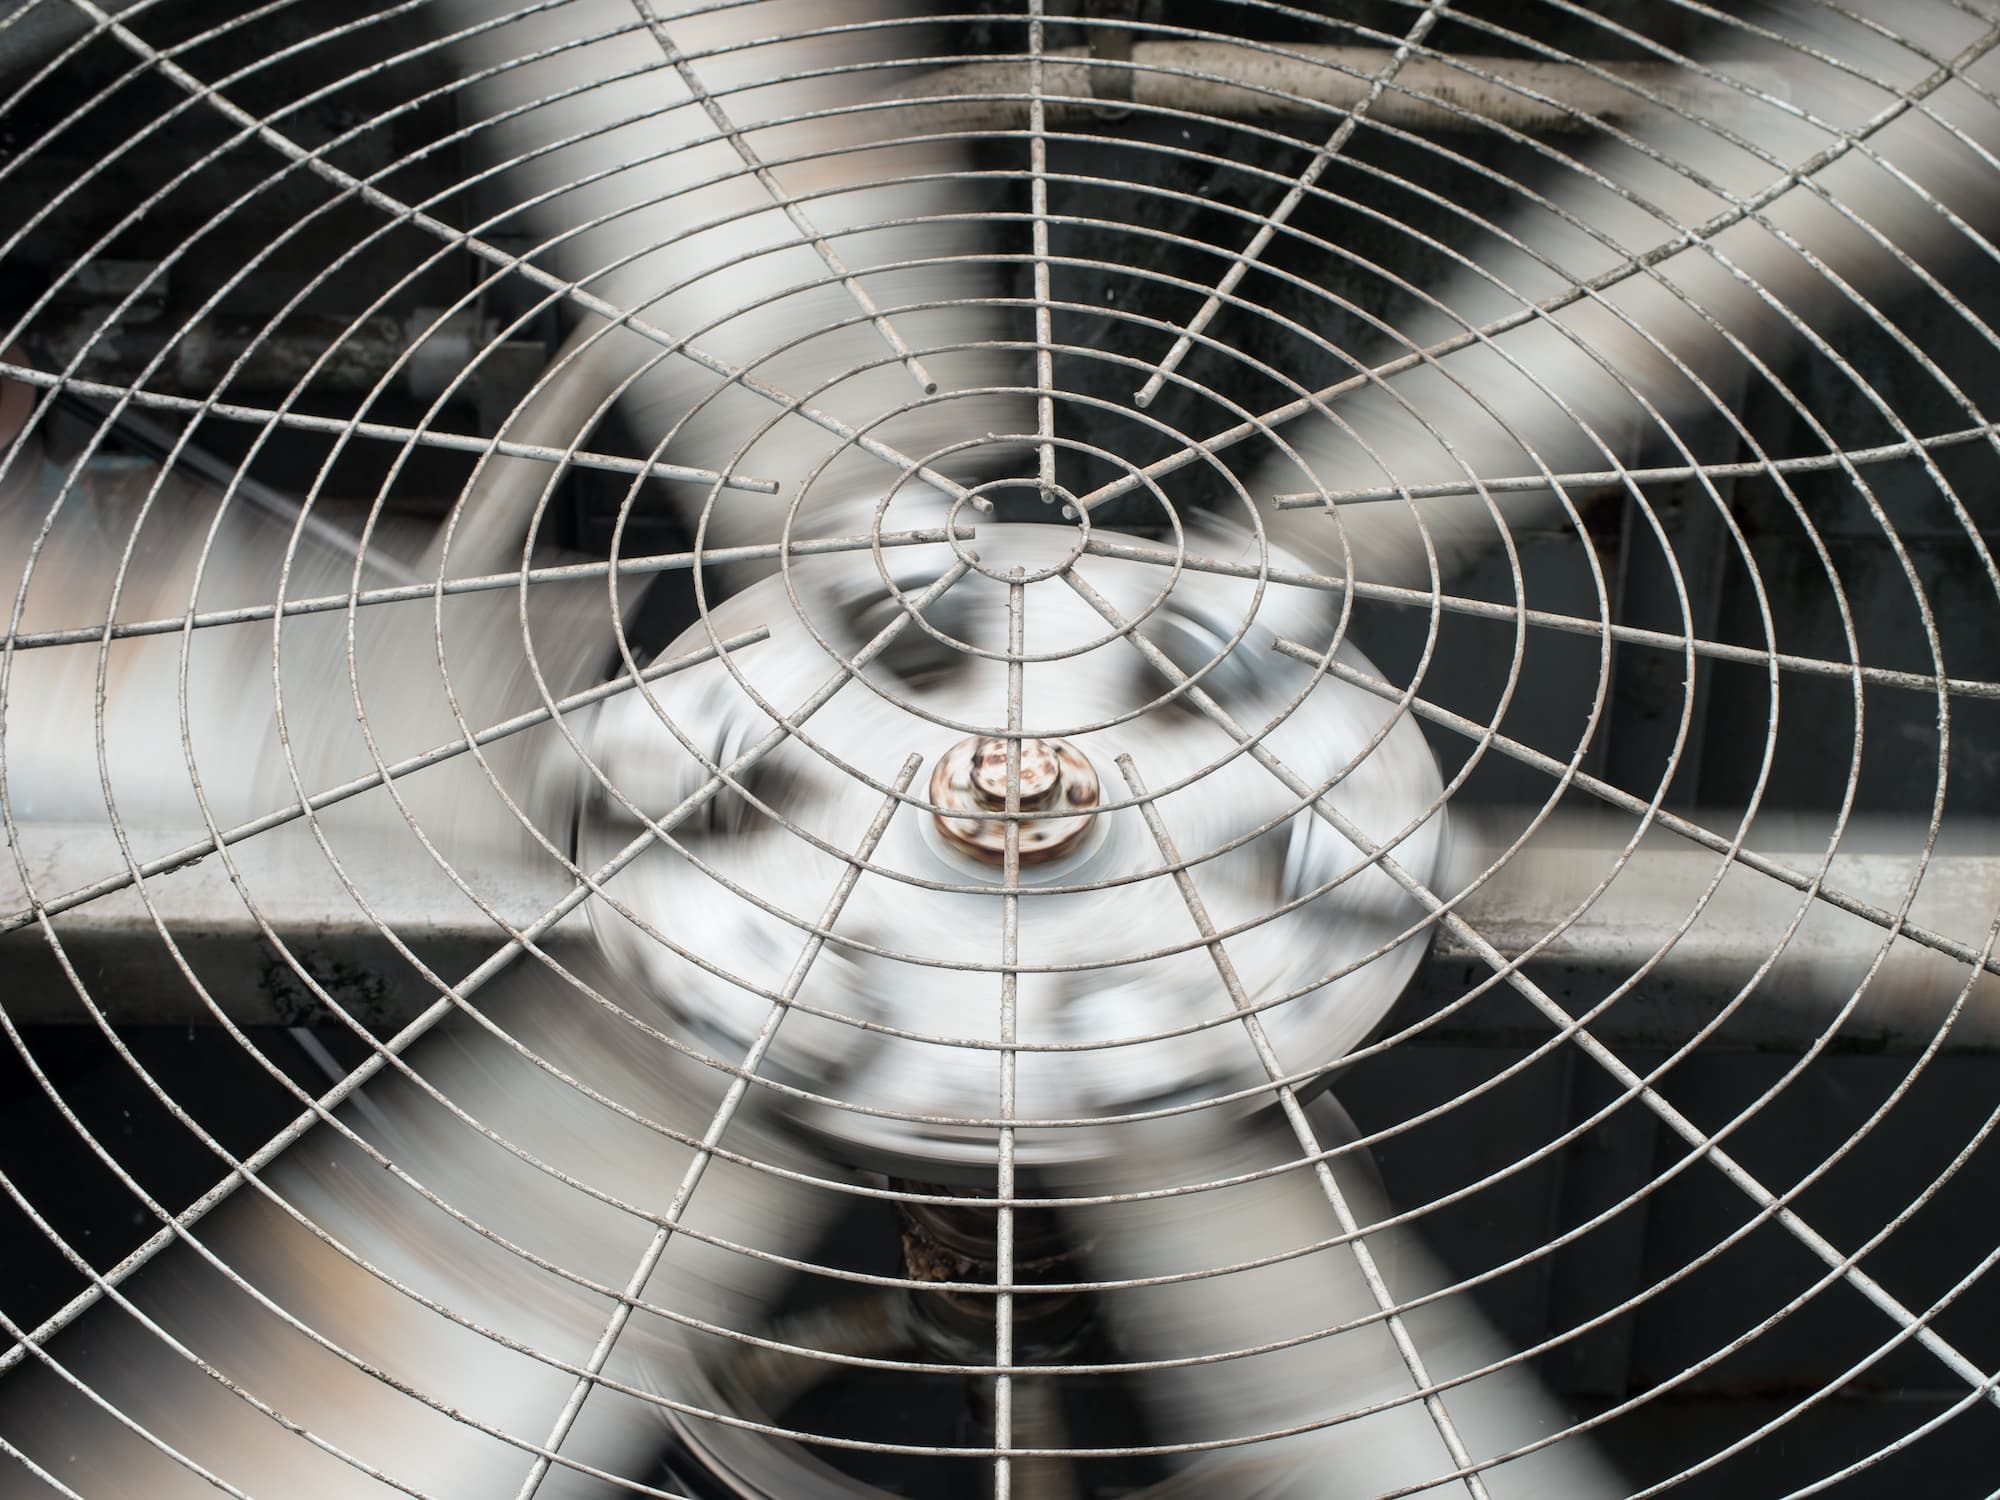 HVAC (Heating, Ventilation and Air Conditioning) spinning blades.